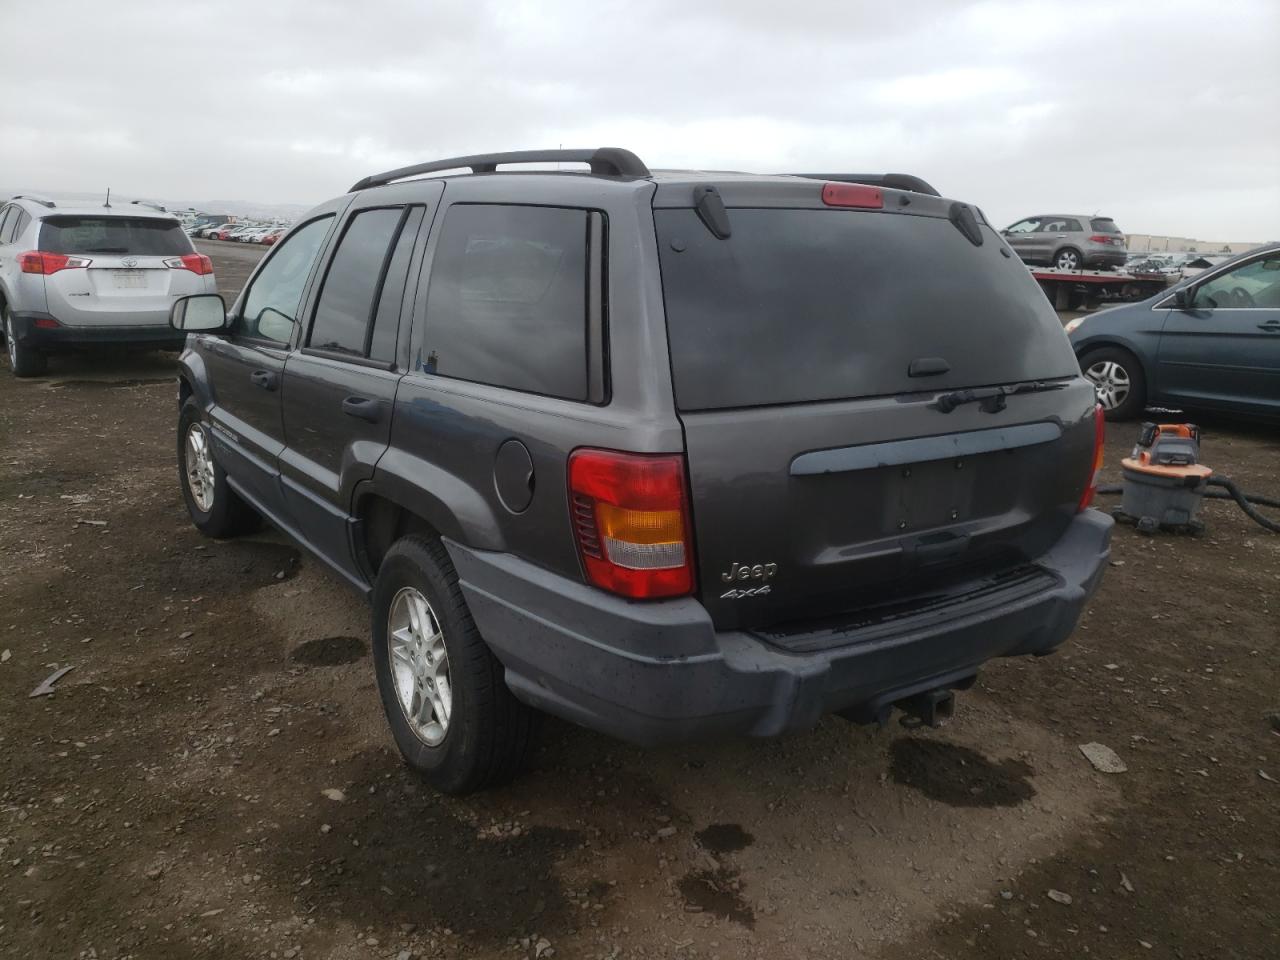 2004 JEEP CHEROKEE VIN 1J4GW48S54C189186 from the USA